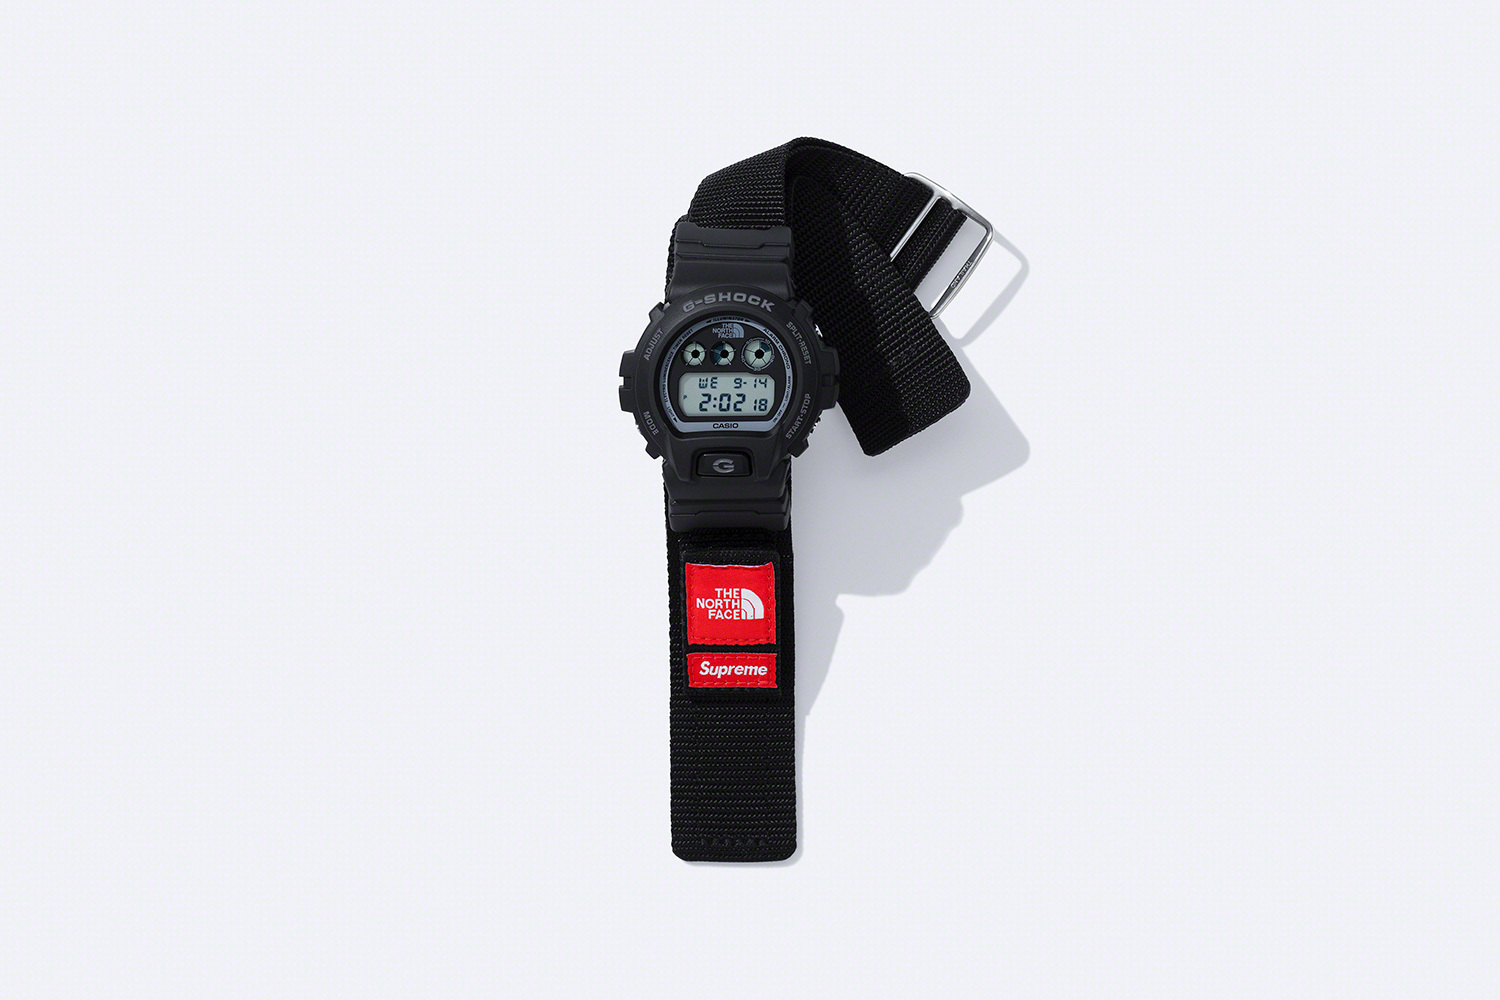 Supreme®/The North Face® G-SHOCK Watch | Supreme 22fw